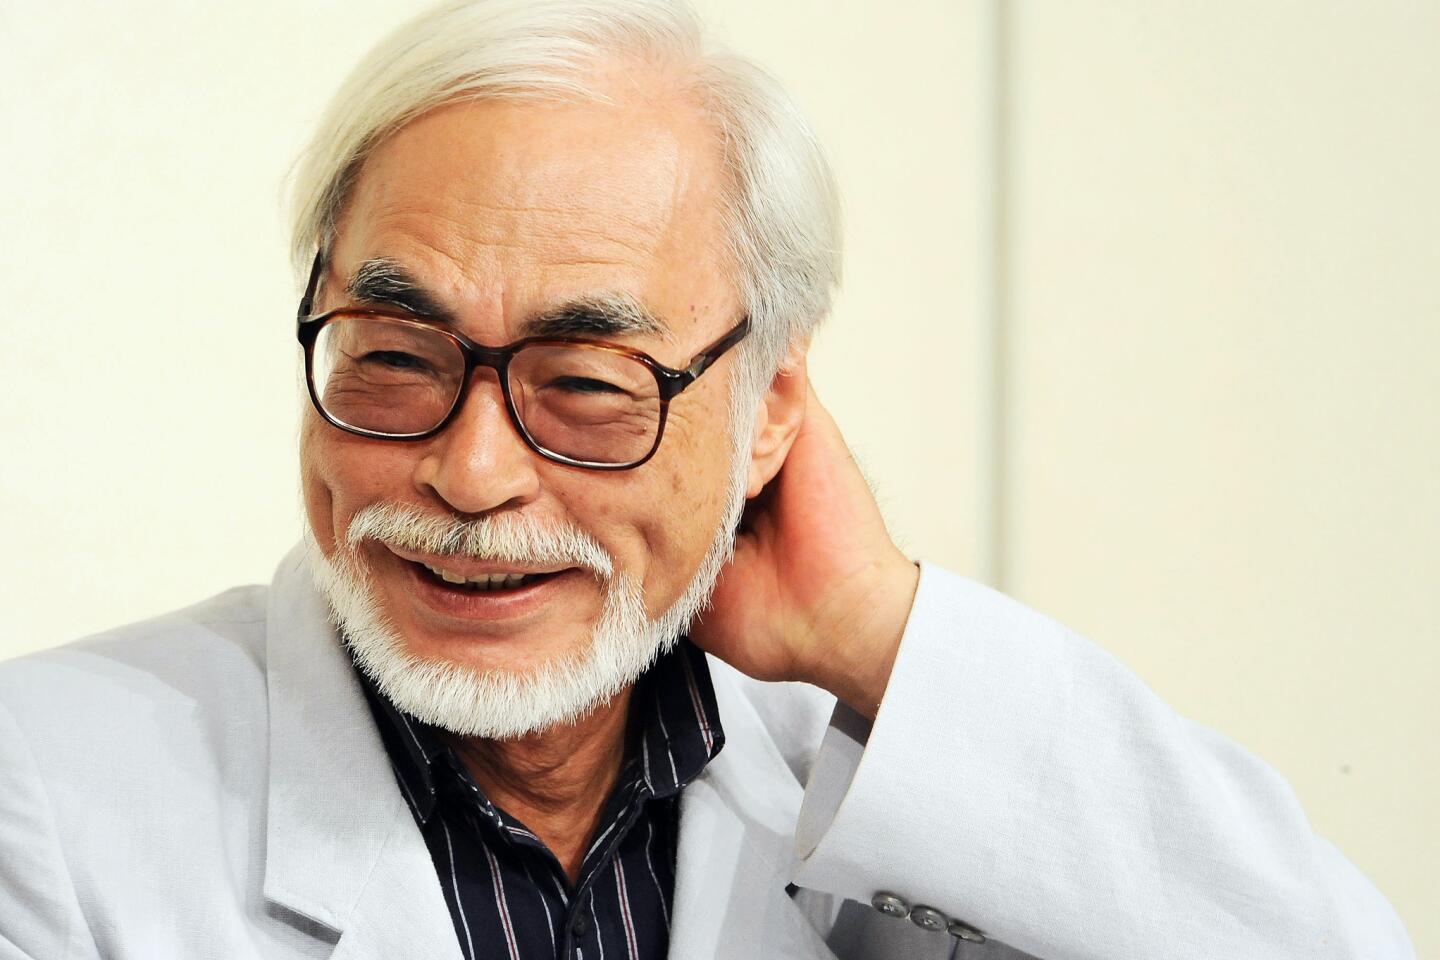 How Hayao Miyazaki has made some of his best work out of retirement